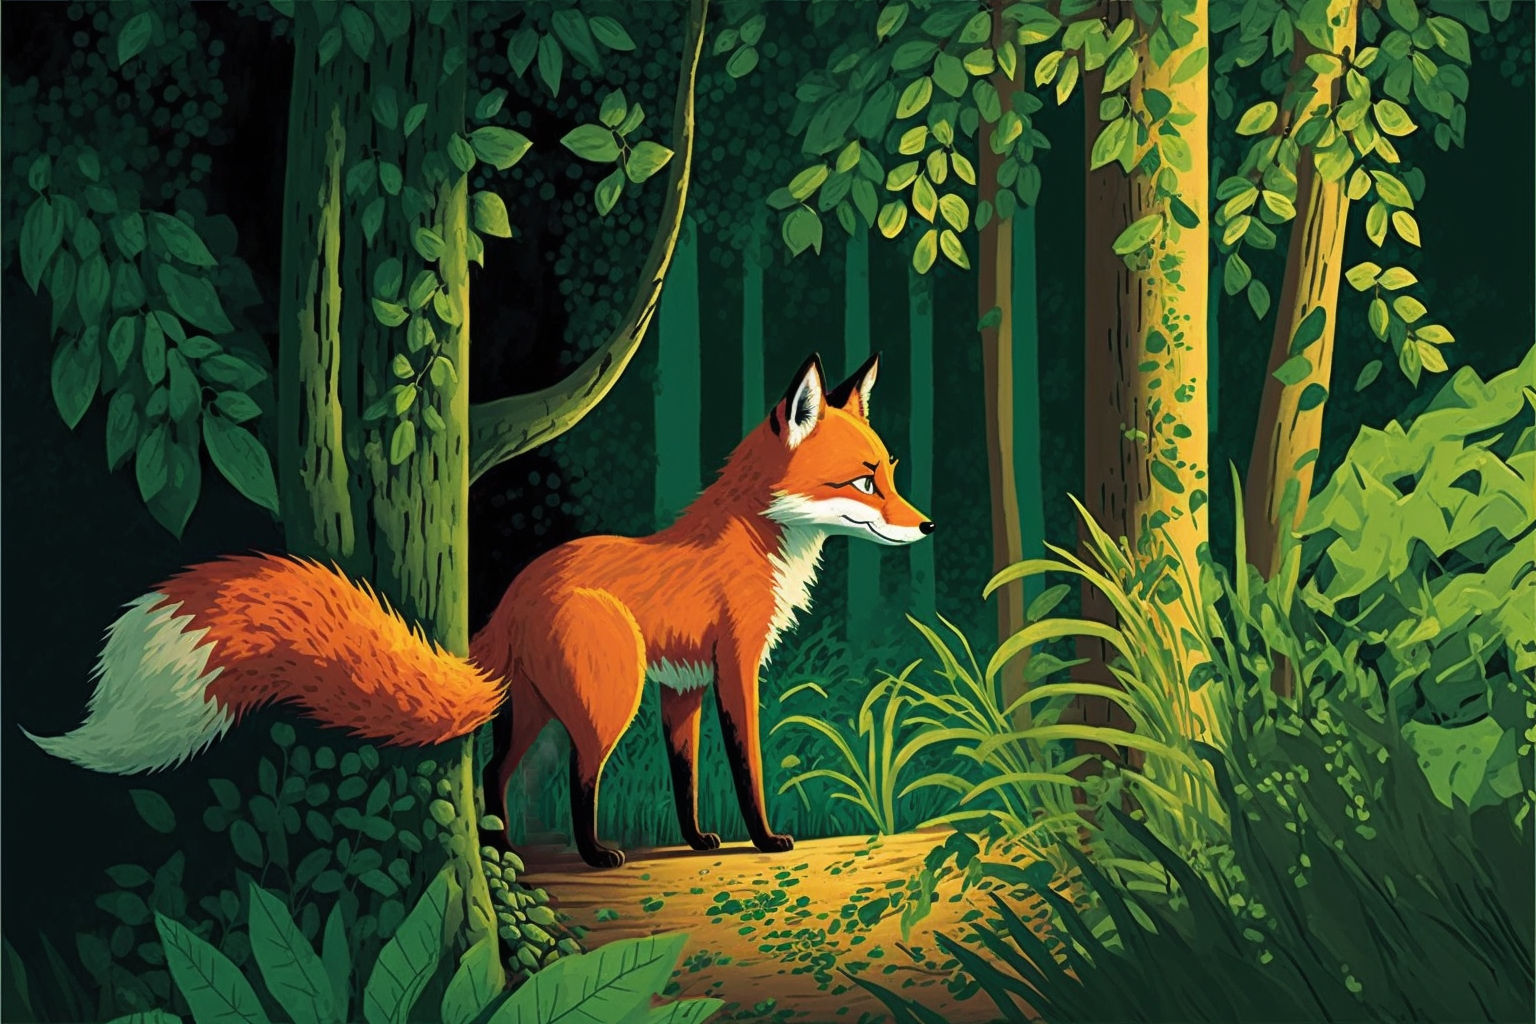 The Fox Without a Tail